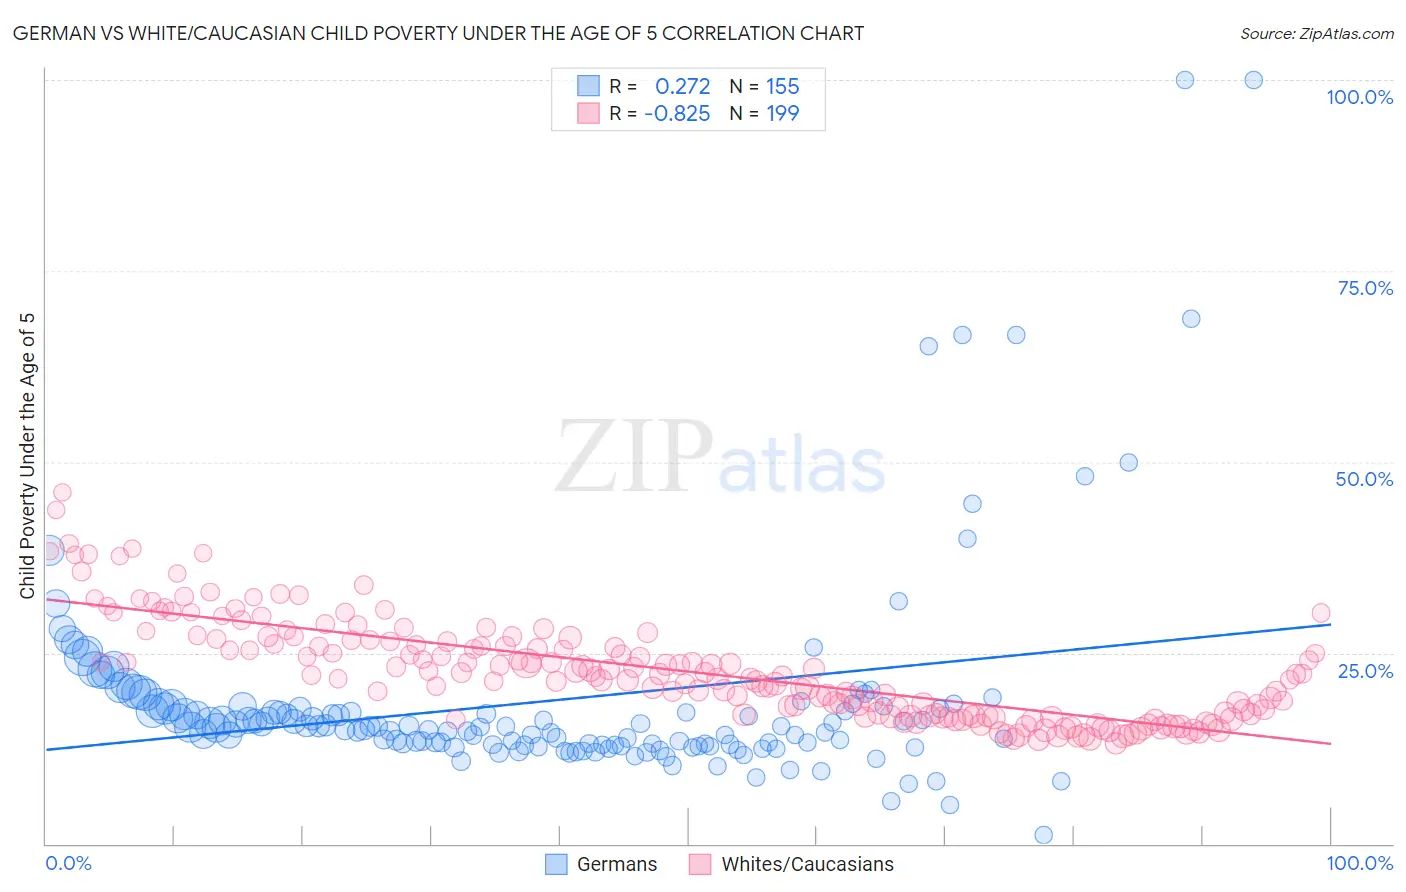 German vs White/Caucasian Child Poverty Under the Age of 5